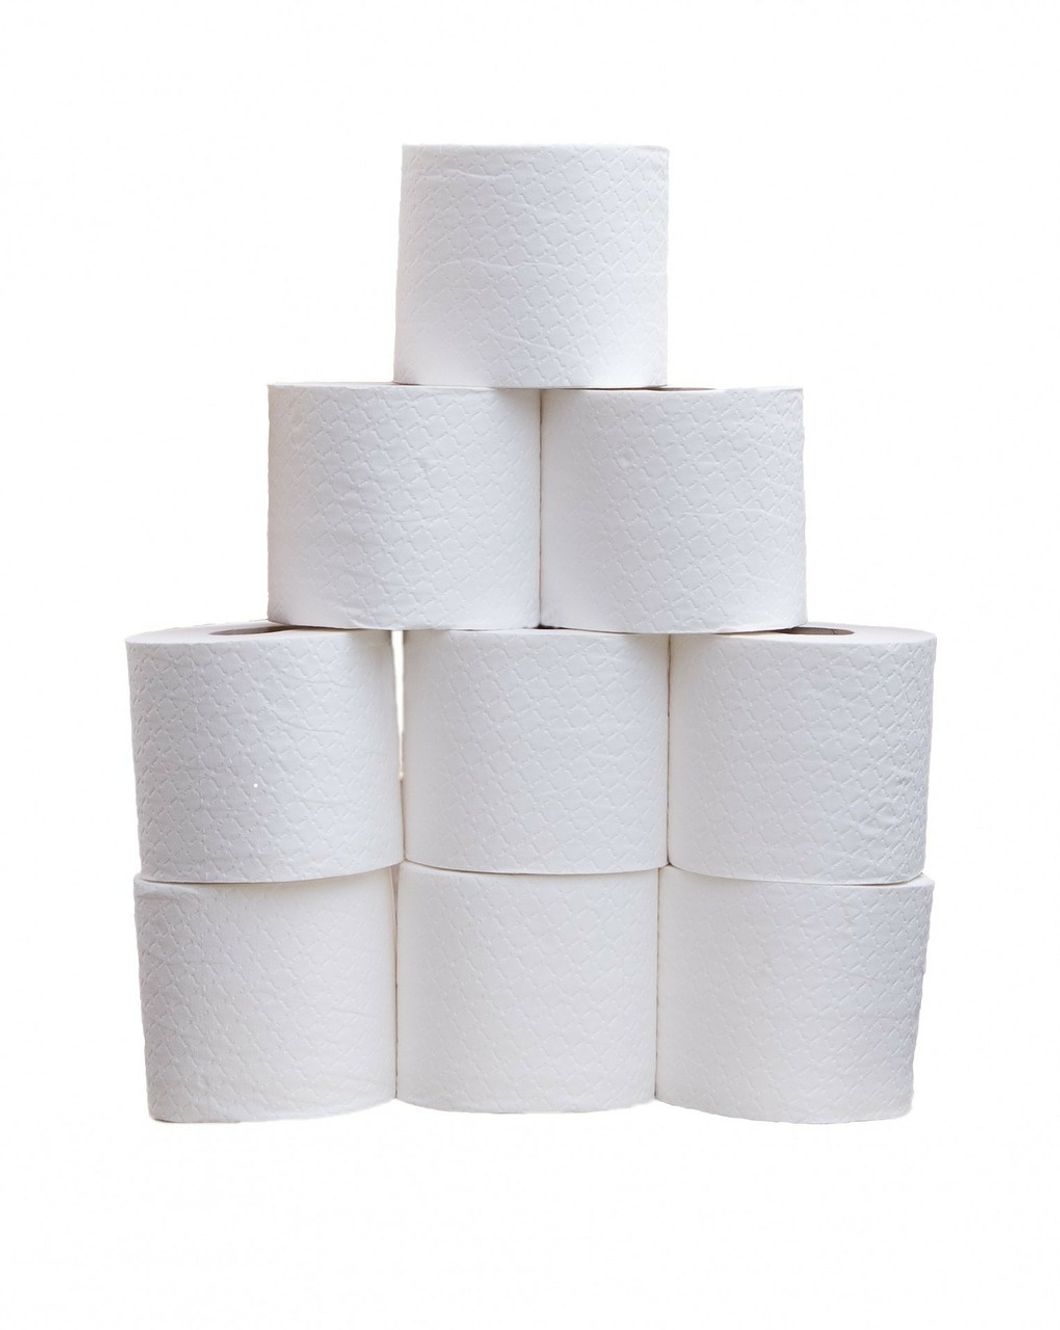 Stacked toilet paper